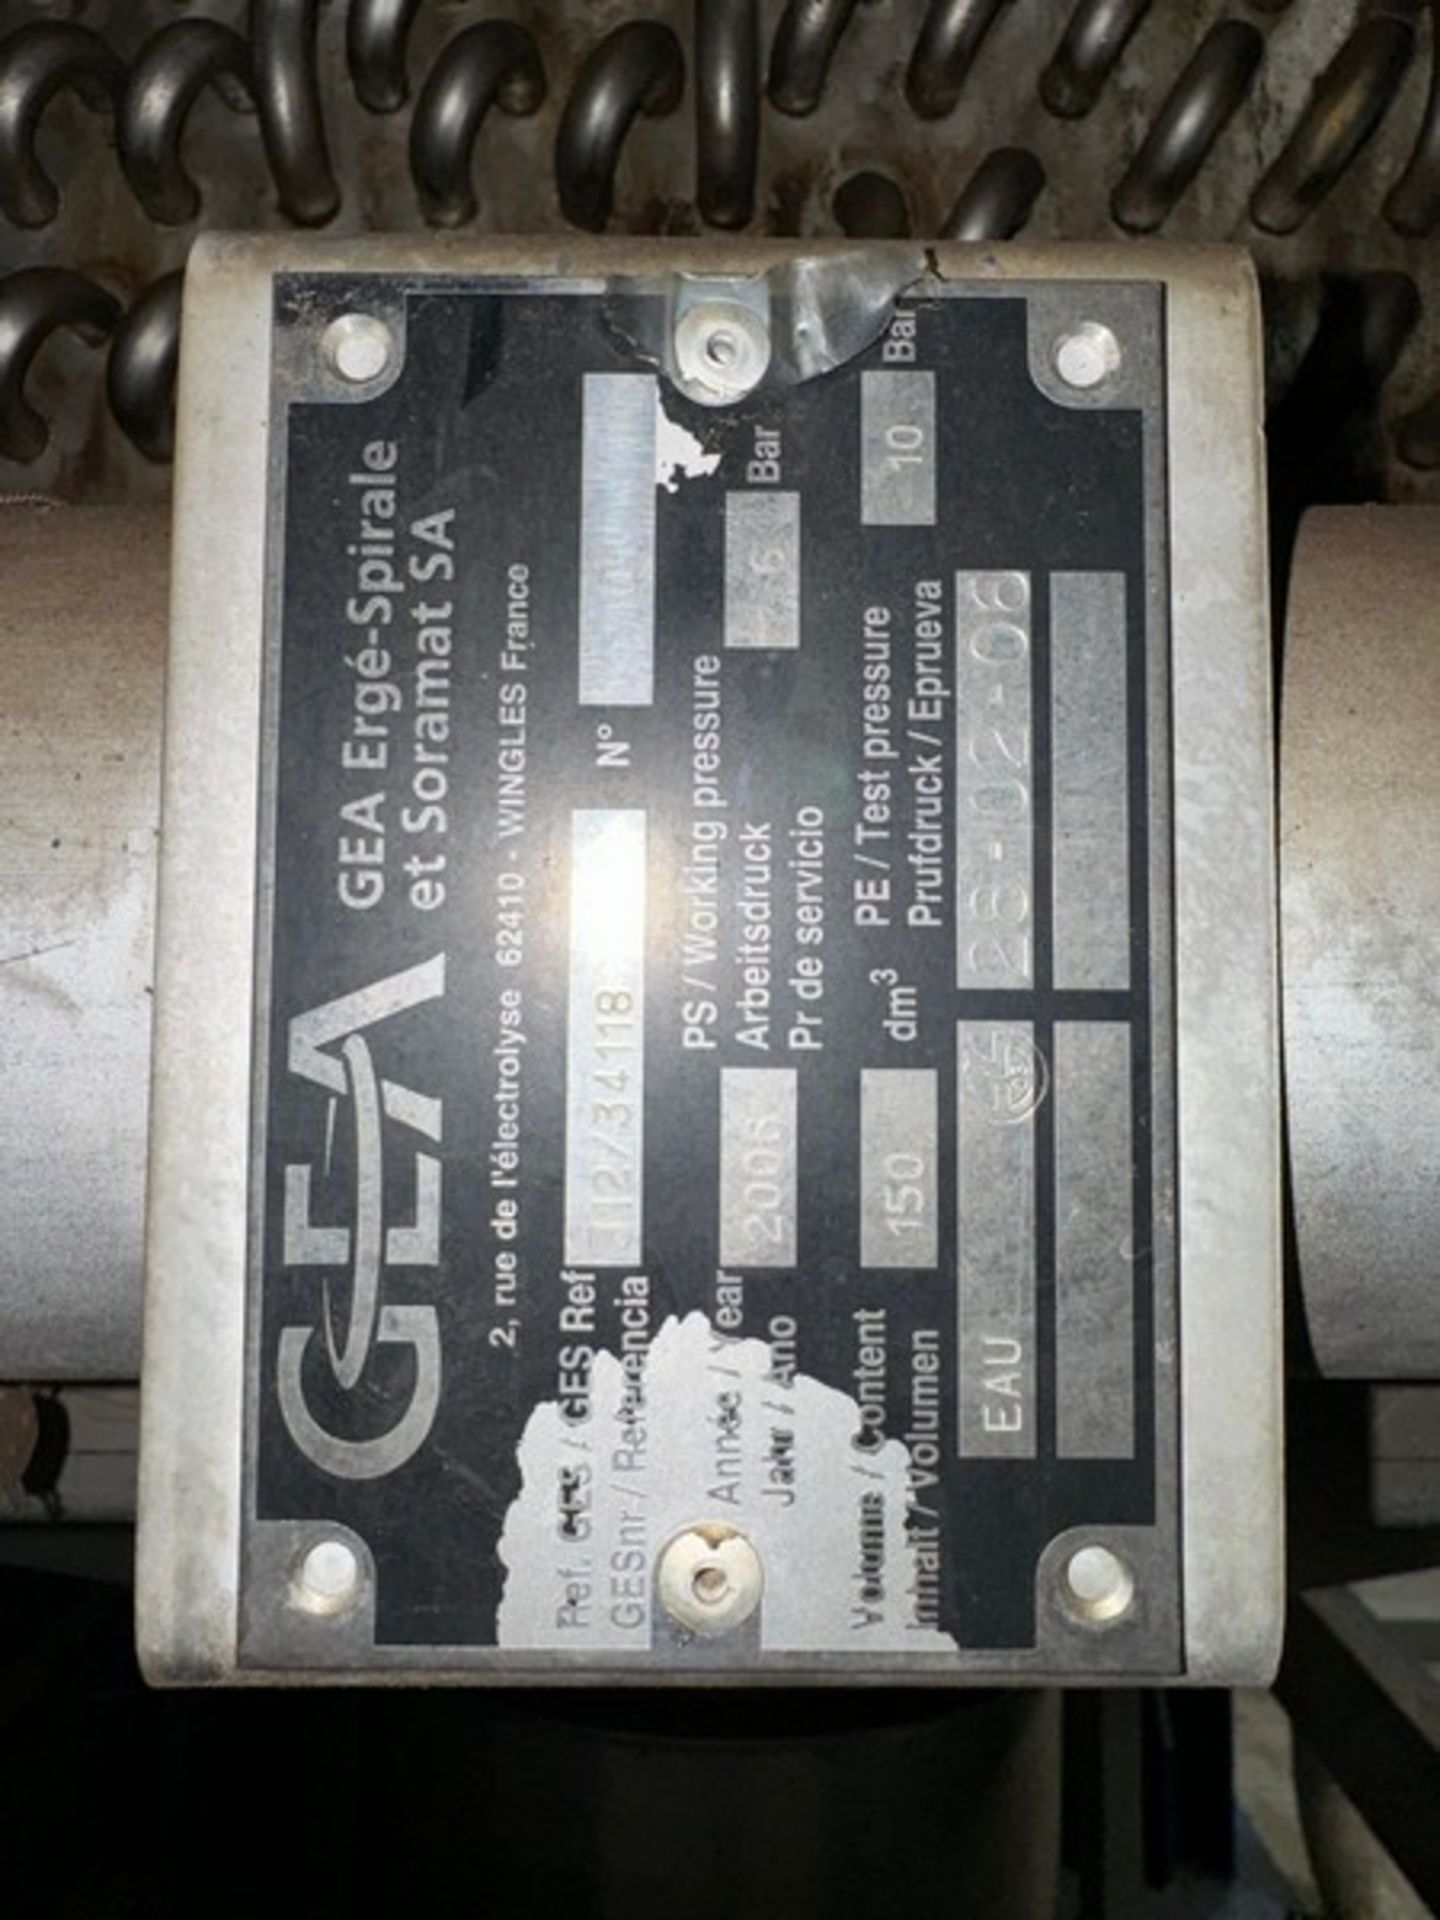 GEA S/S Cooling Unit, GES REF.: 312/34118, Volume/Content: 150, with Vertical Duct Work, Mounted - Image 5 of 5